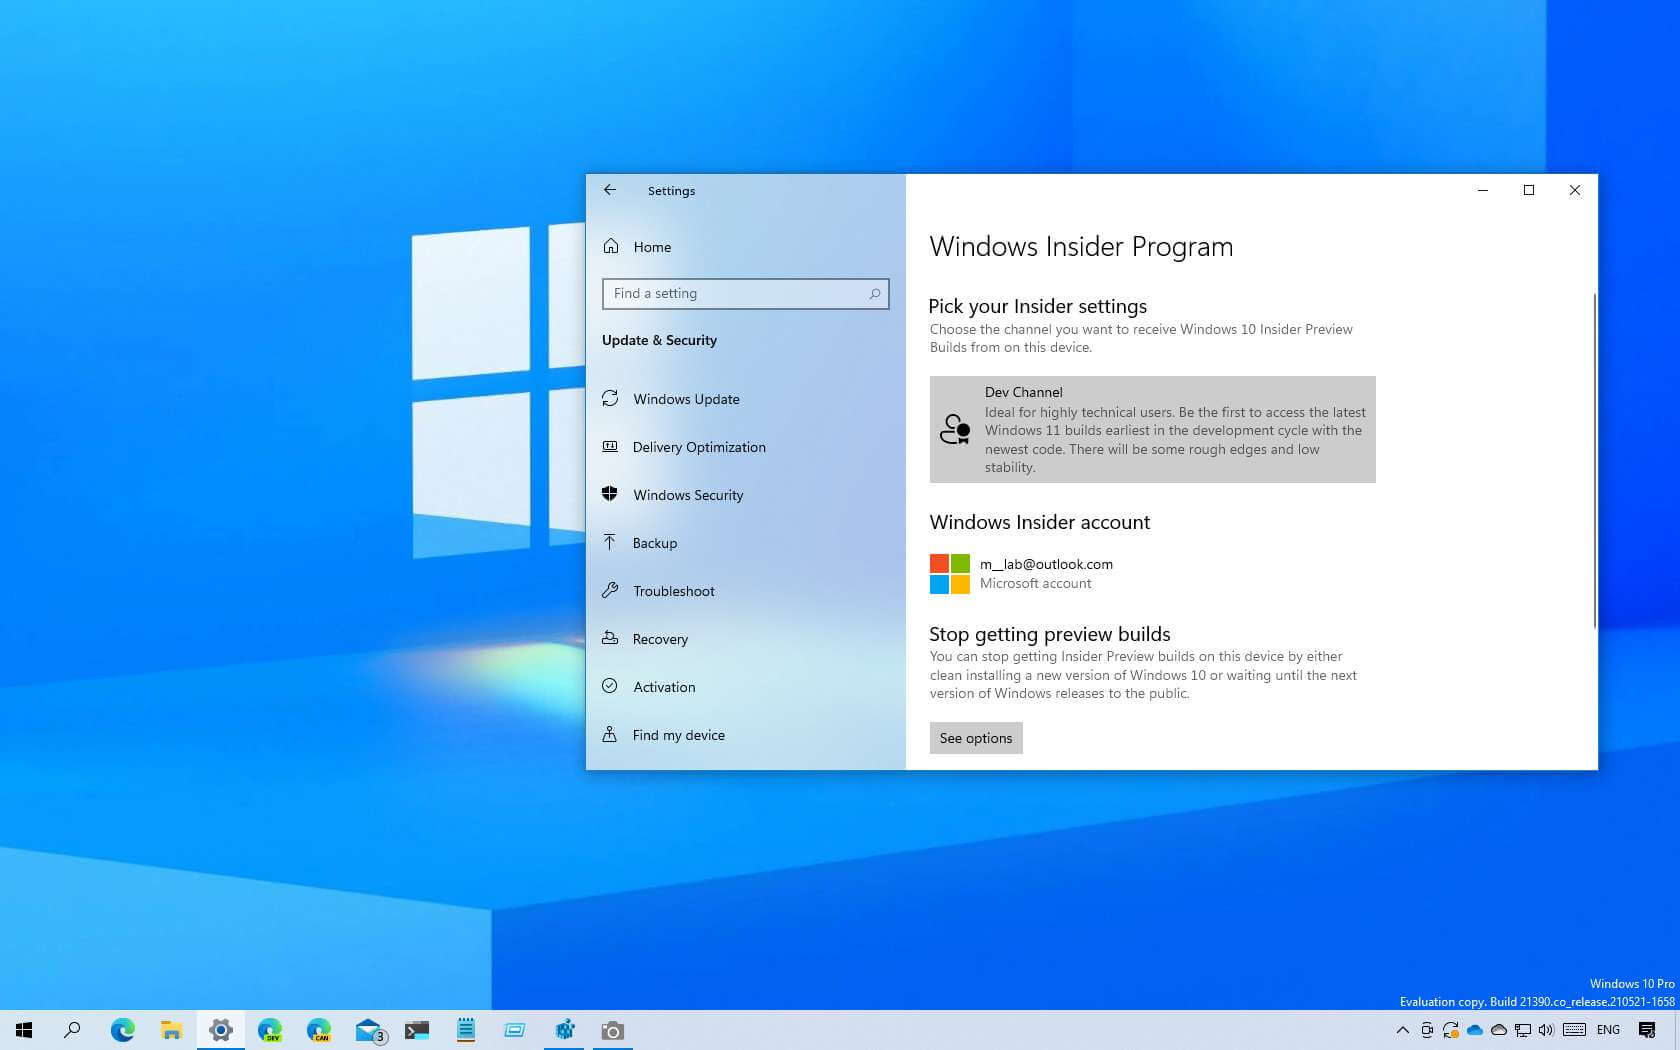 Microsoft Offers TPM 2.0 Bypass to Install Windows 11 on Unsupported PCs